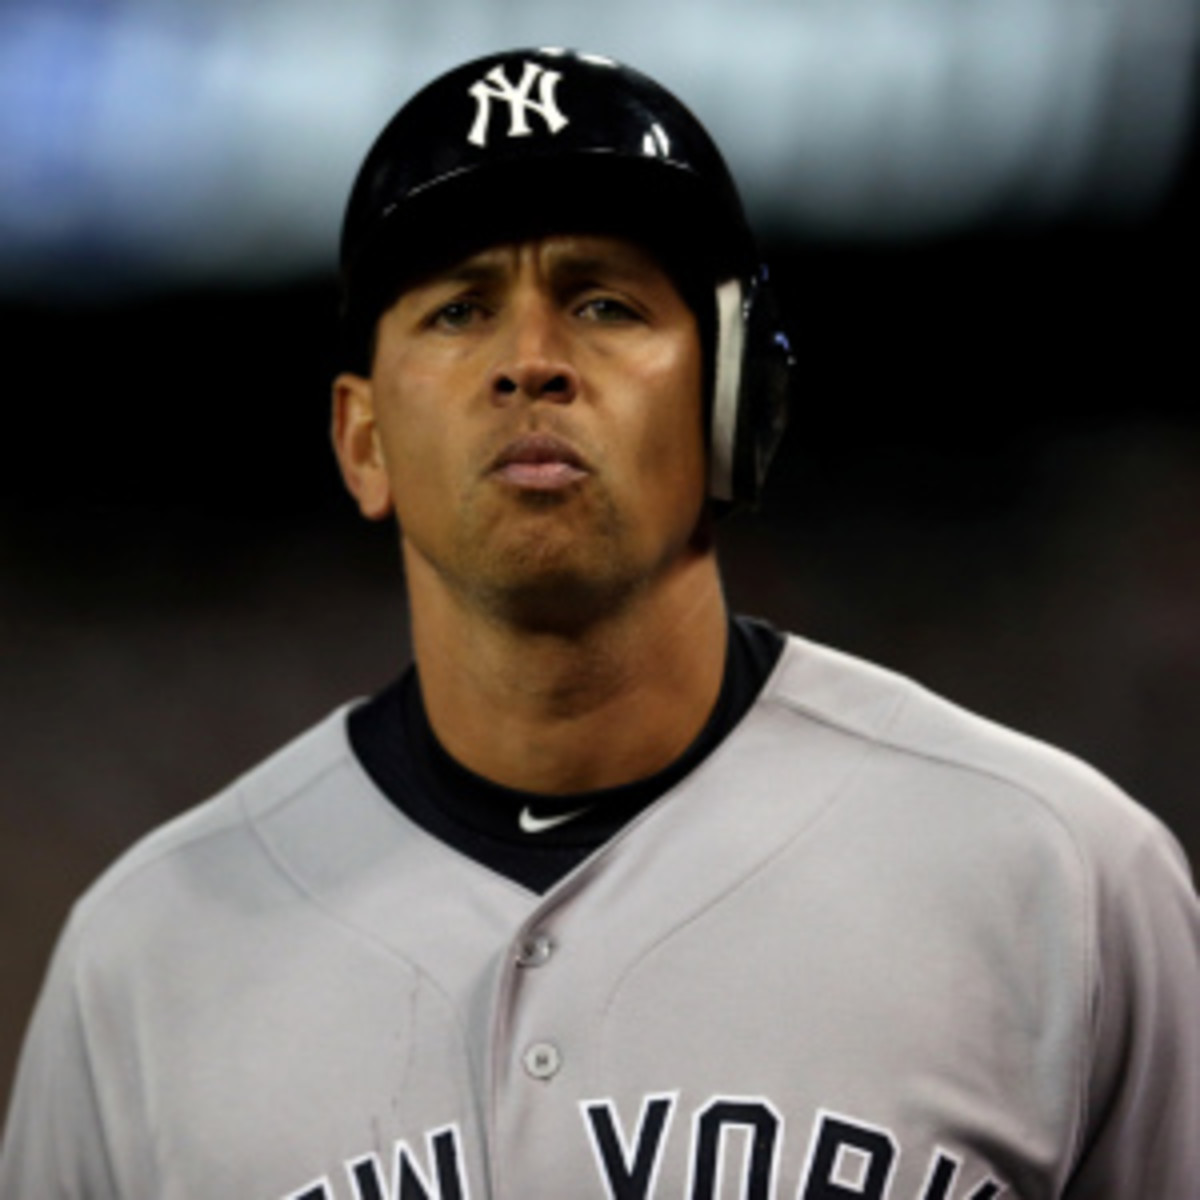 Alex Rodriguez's charity raised $403K in 2006 but donated only $5K - Sports  Illustrated